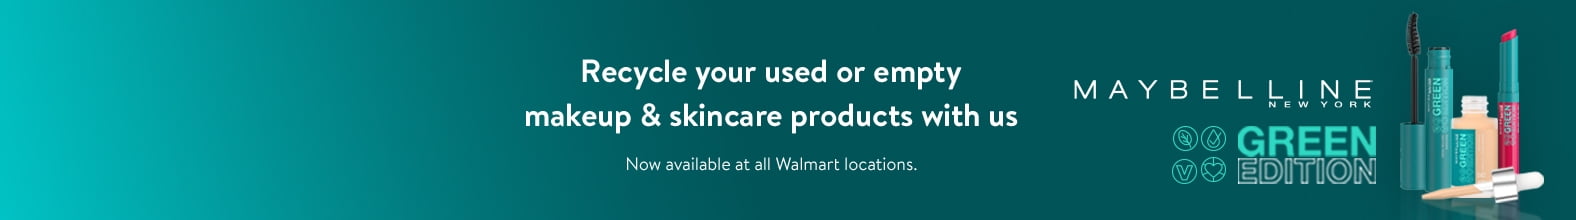 Recycle your used or empty makeup & skincare products with us Now available at all Walmart locations.